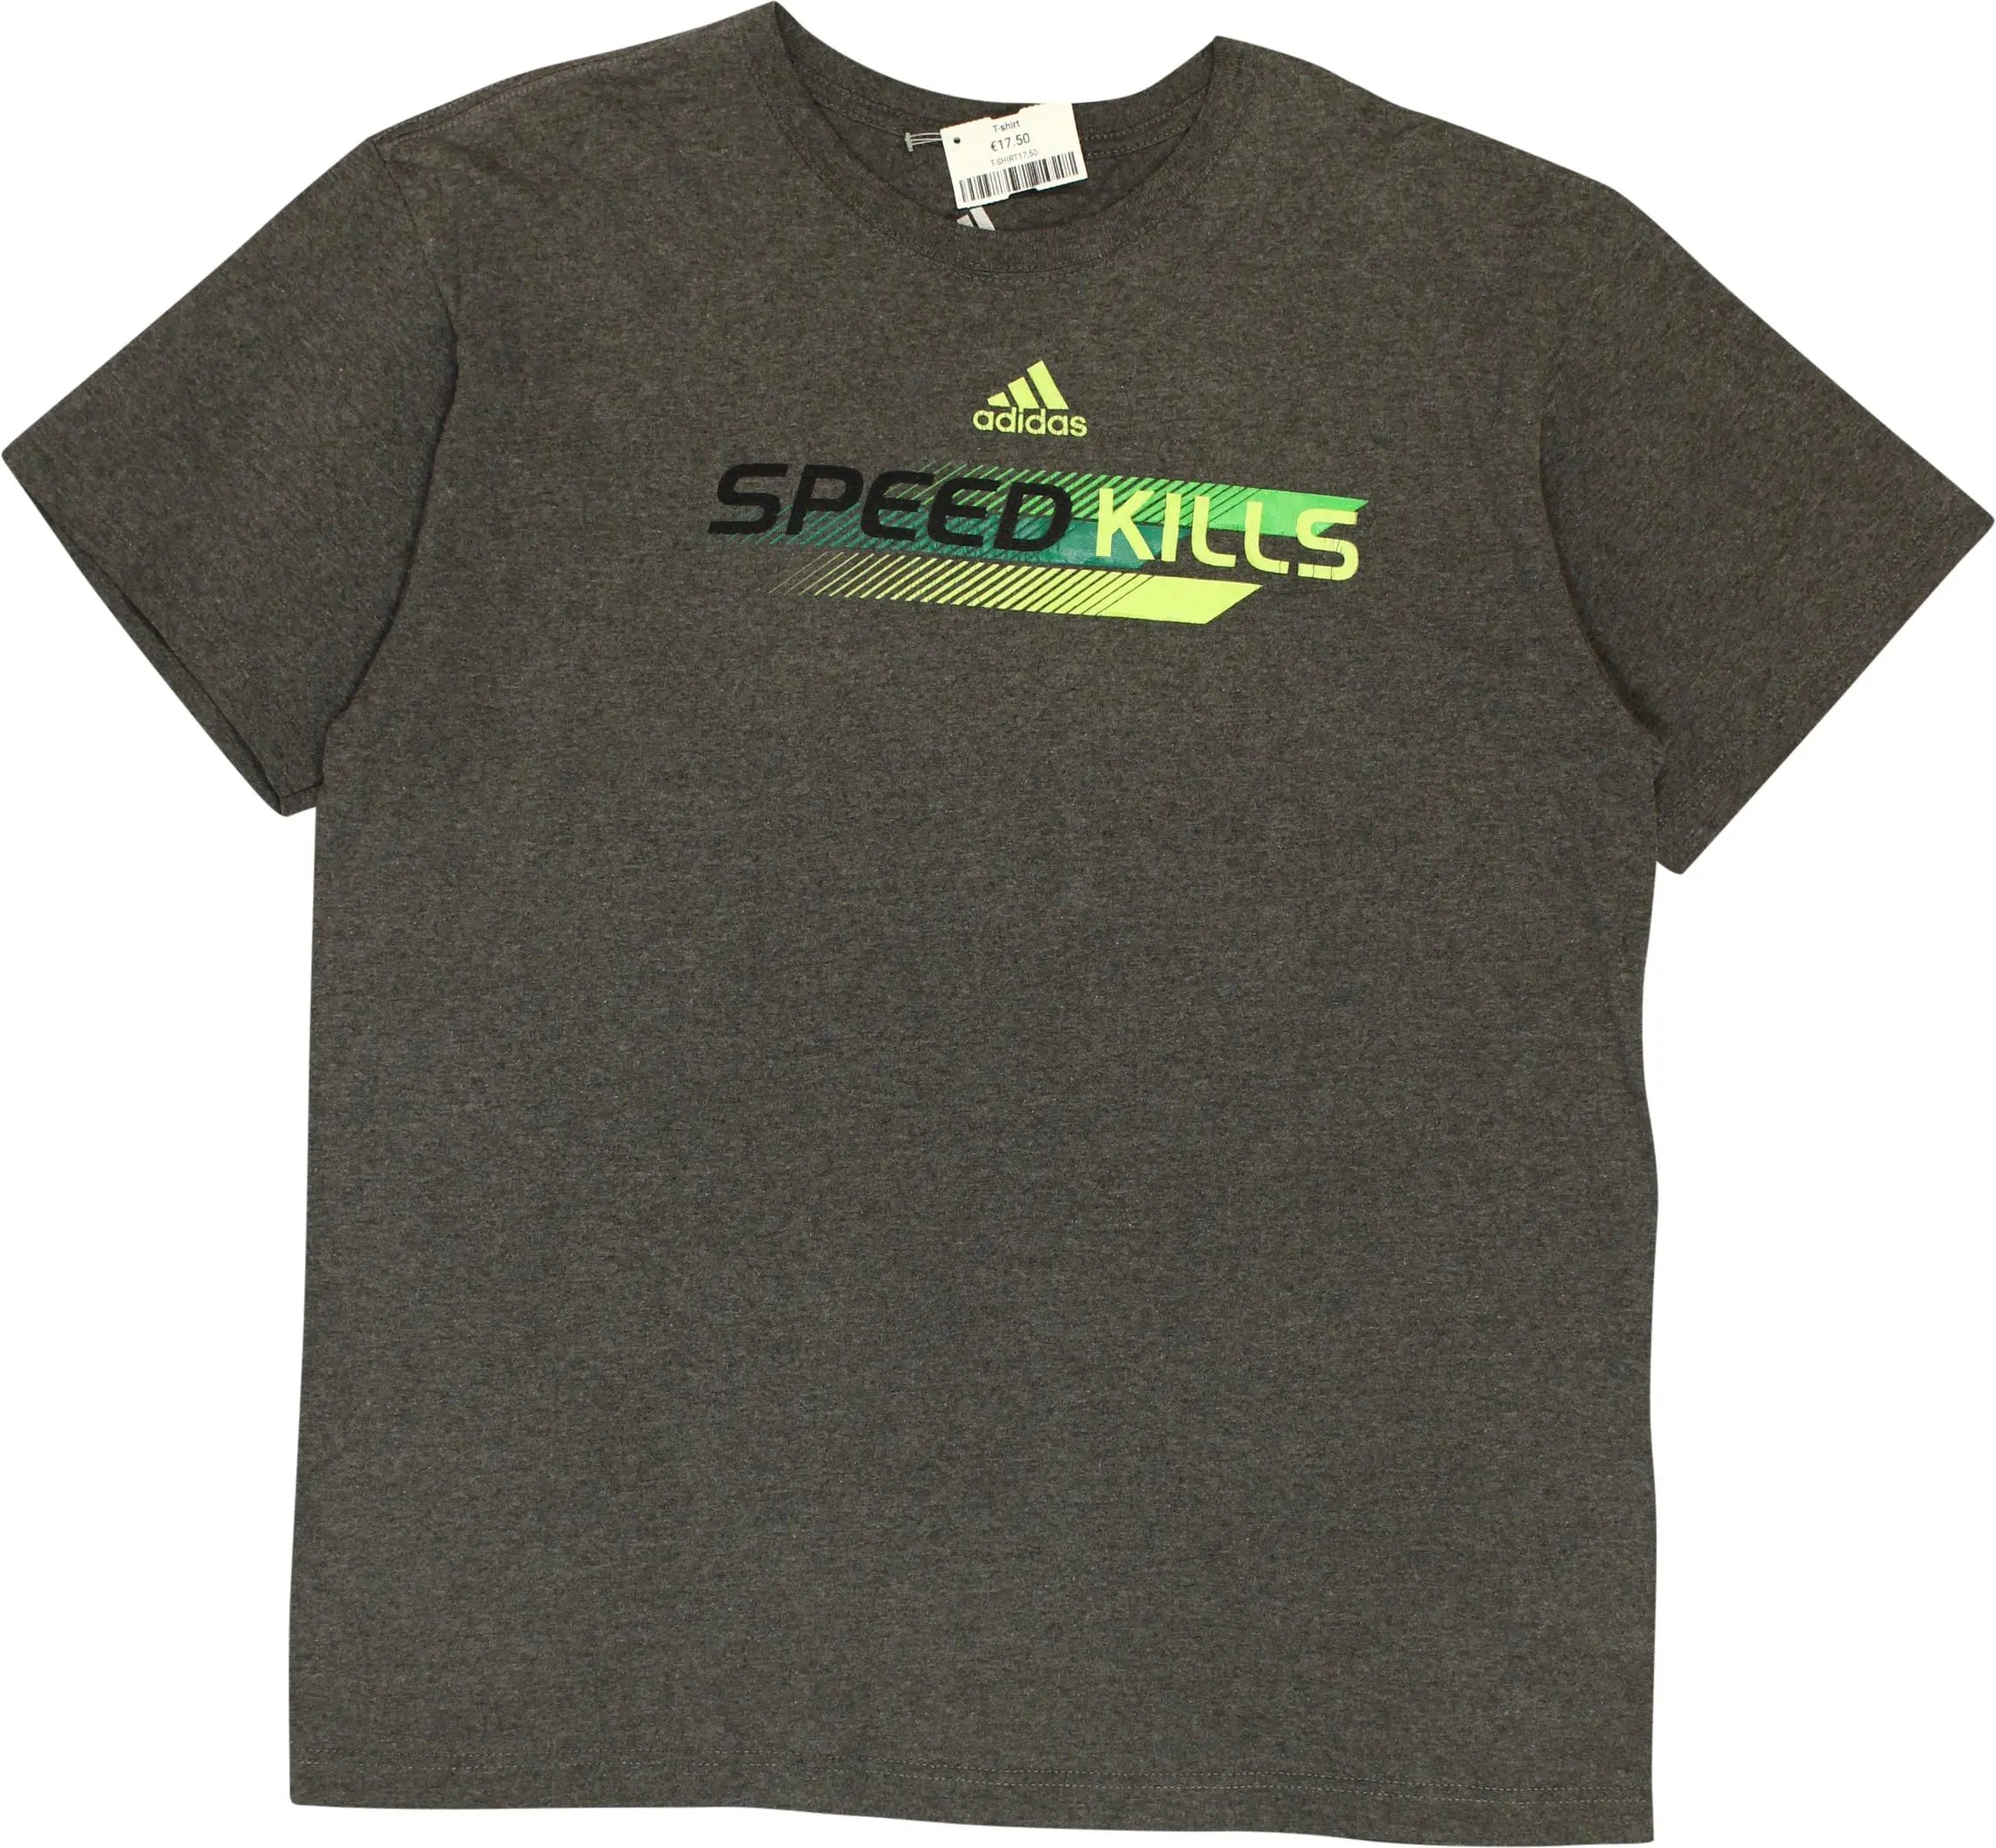 Adidas - Nike T-shirt- ThriftTale.com - Vintage and second handclothing